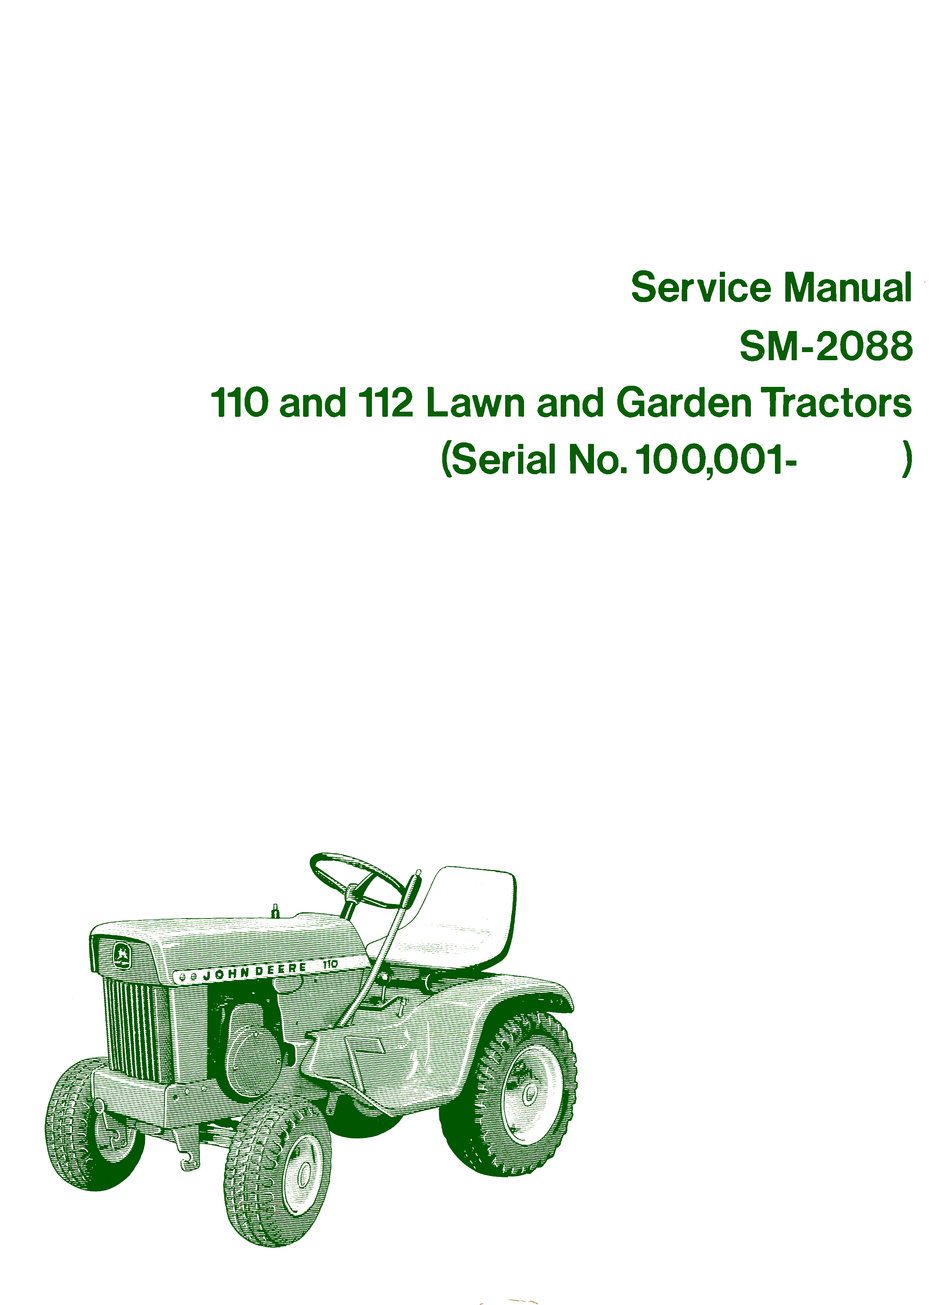 John Deere 110 and 112 Lawn and Garden Tractors Service Manual